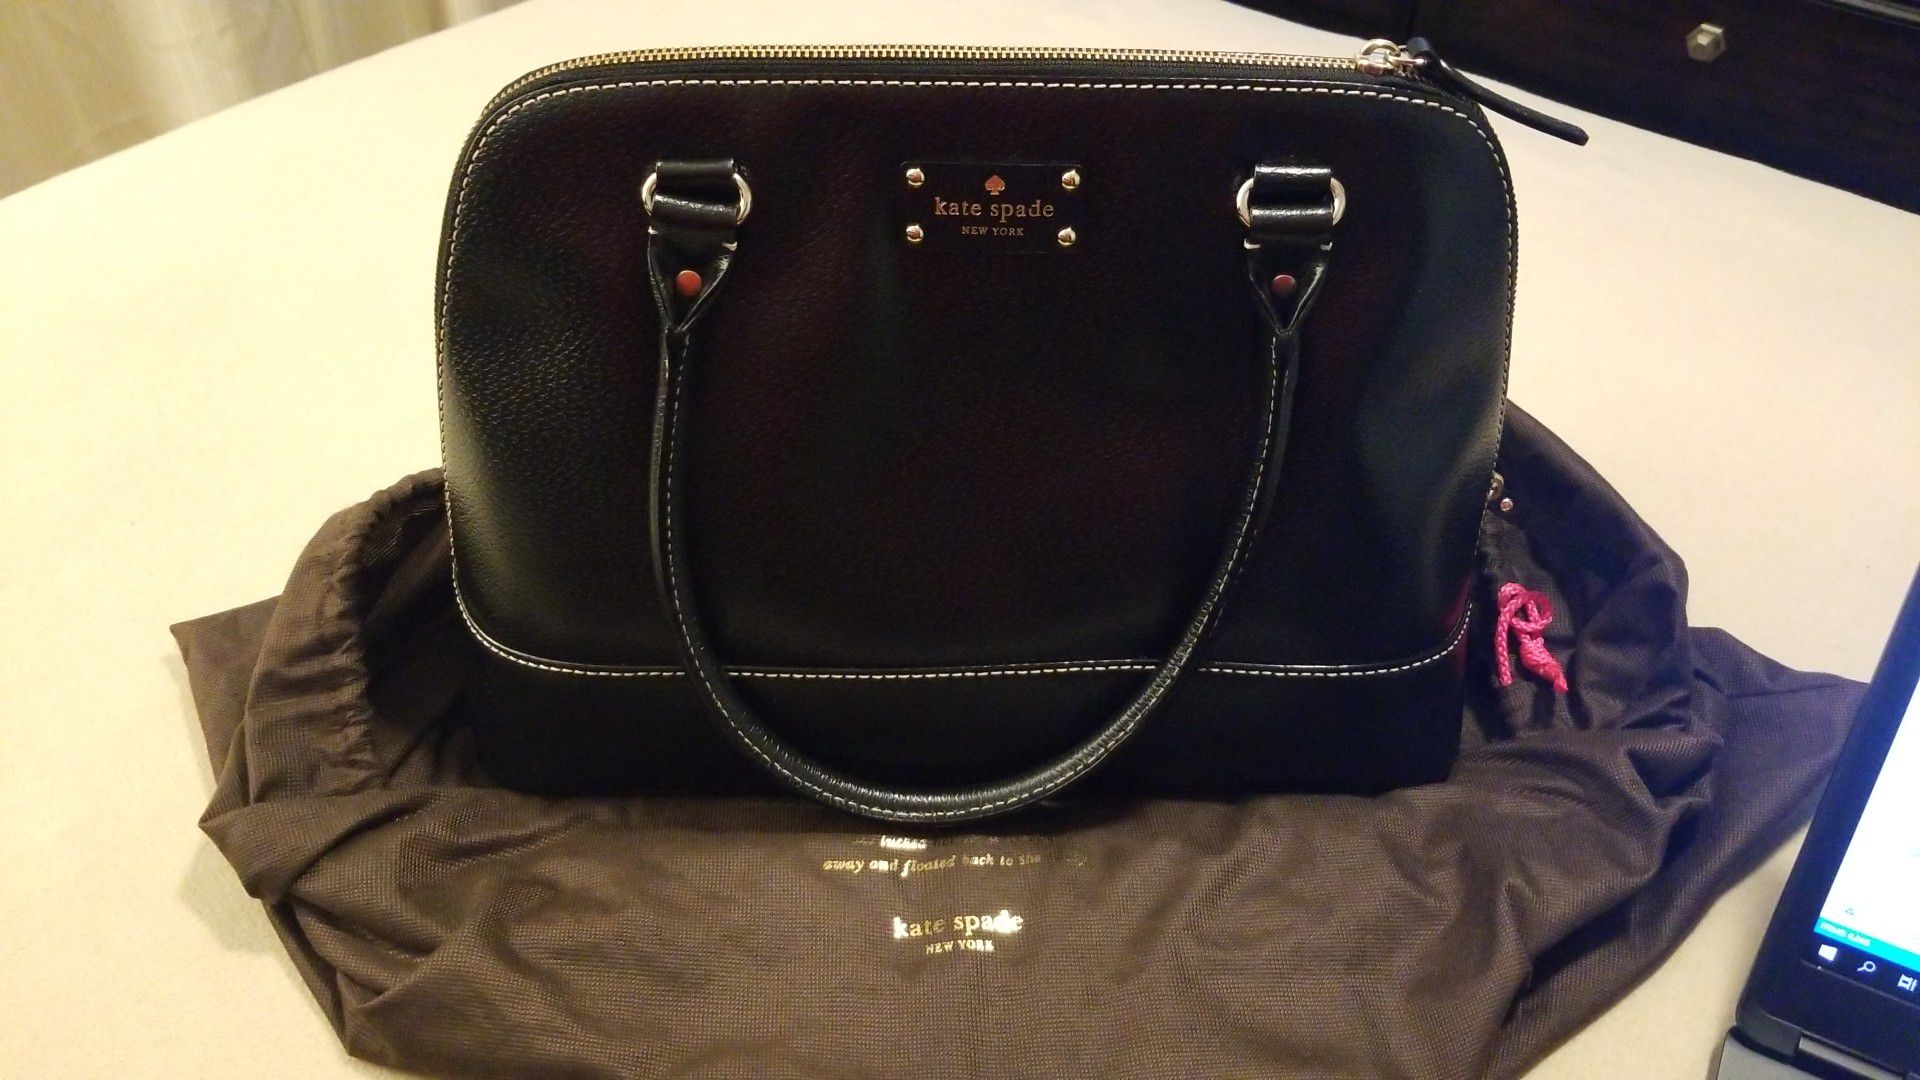 New Kate Spade never used